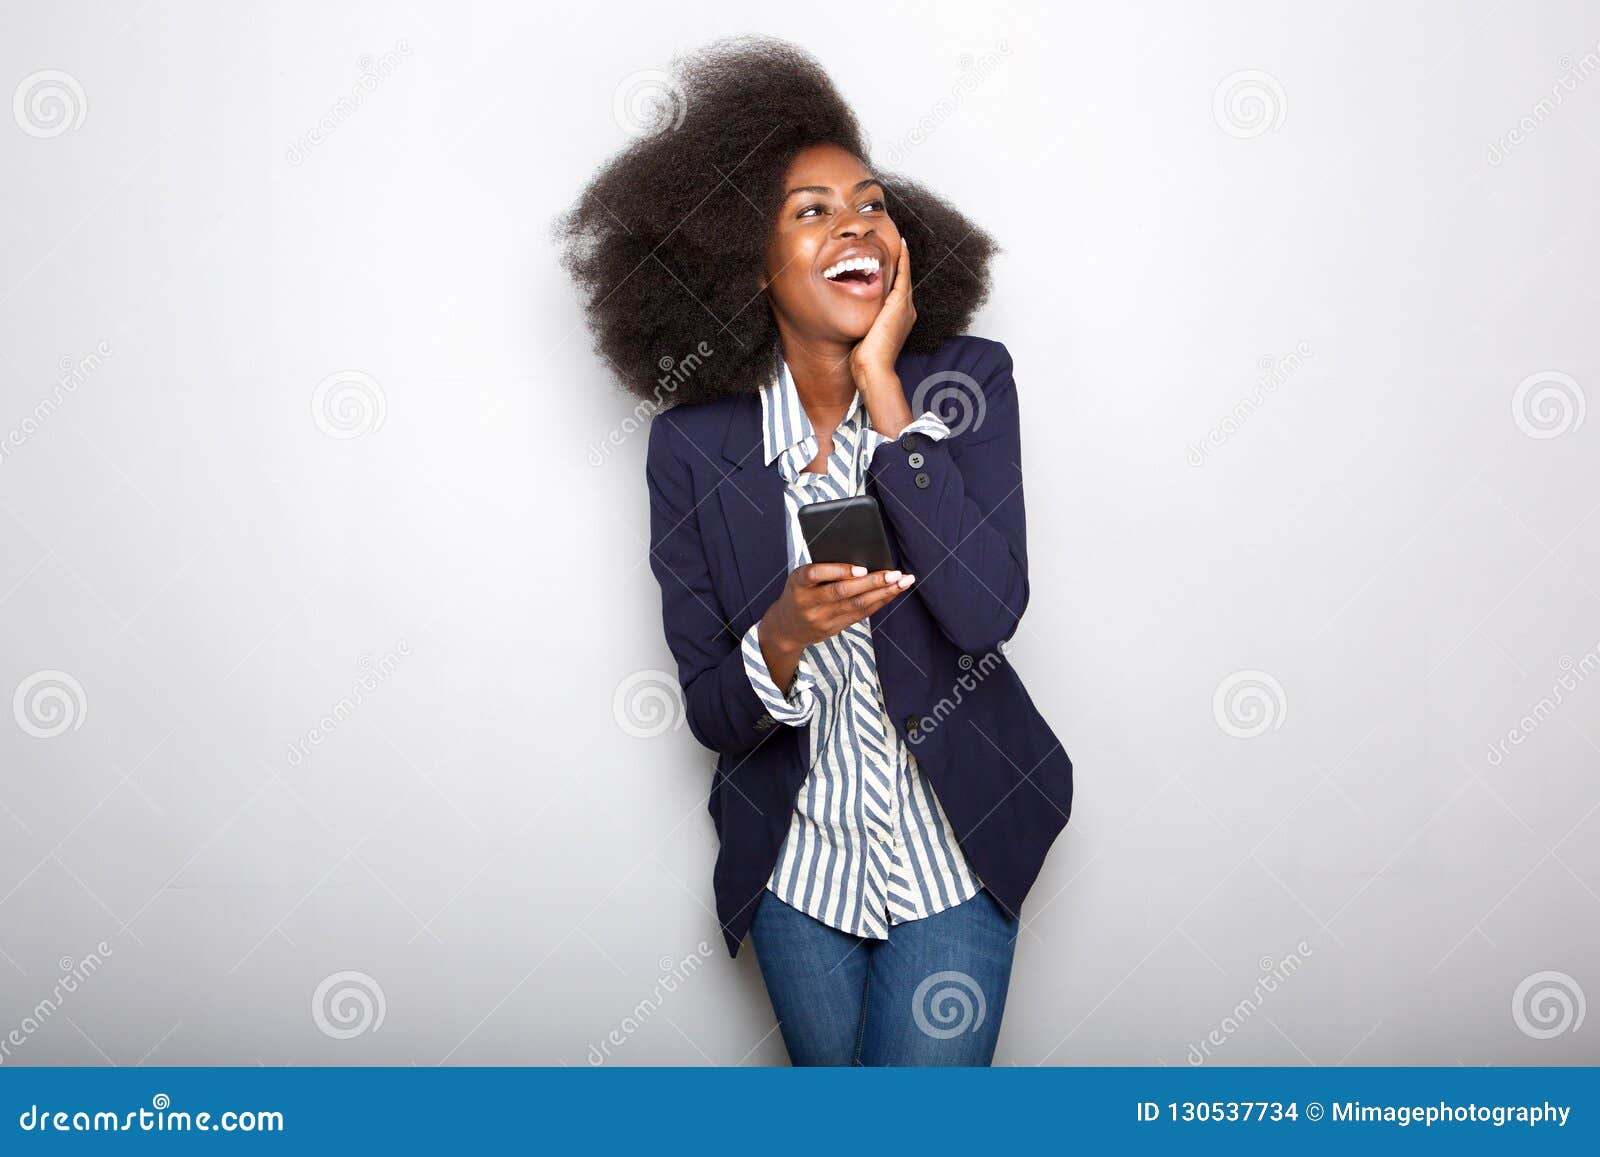 young black woman laughing with cellphone